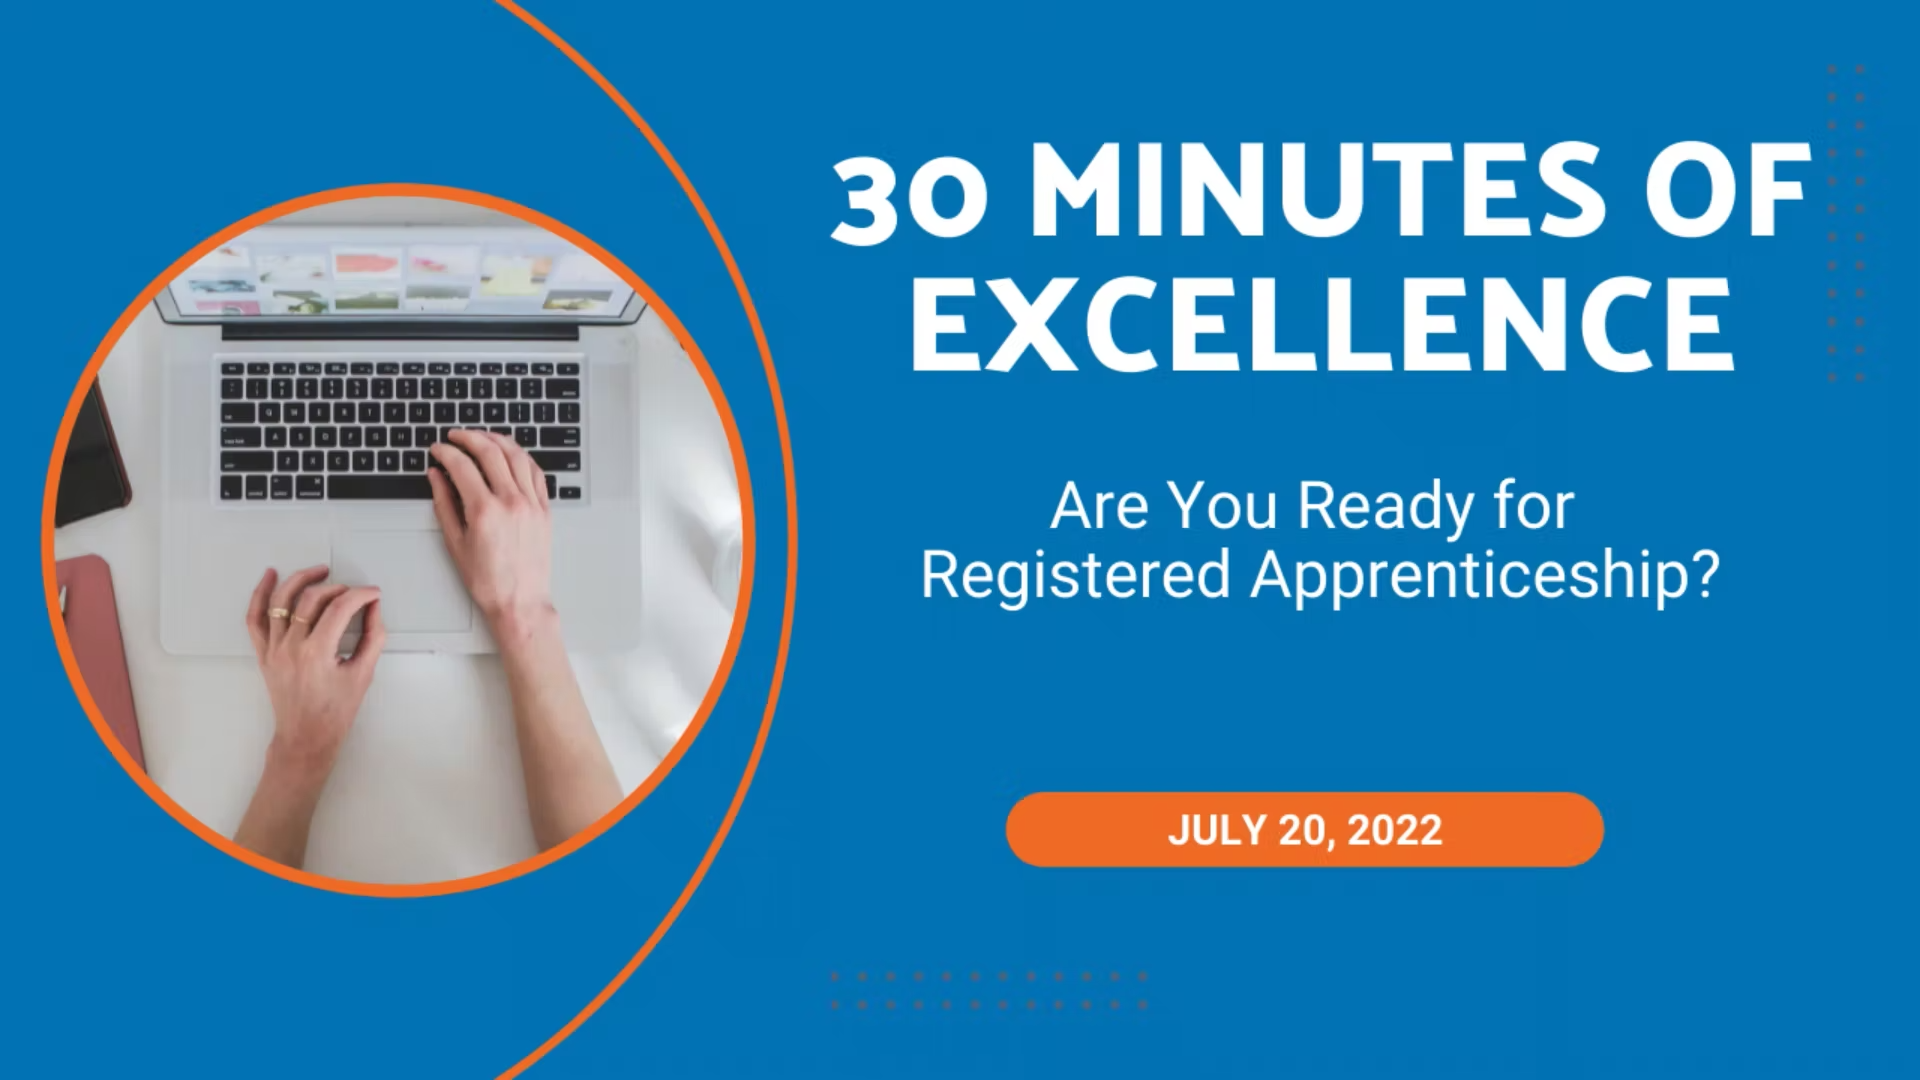 30 Minutes of Excellence - Are You Ready For Registered Apprenticeship